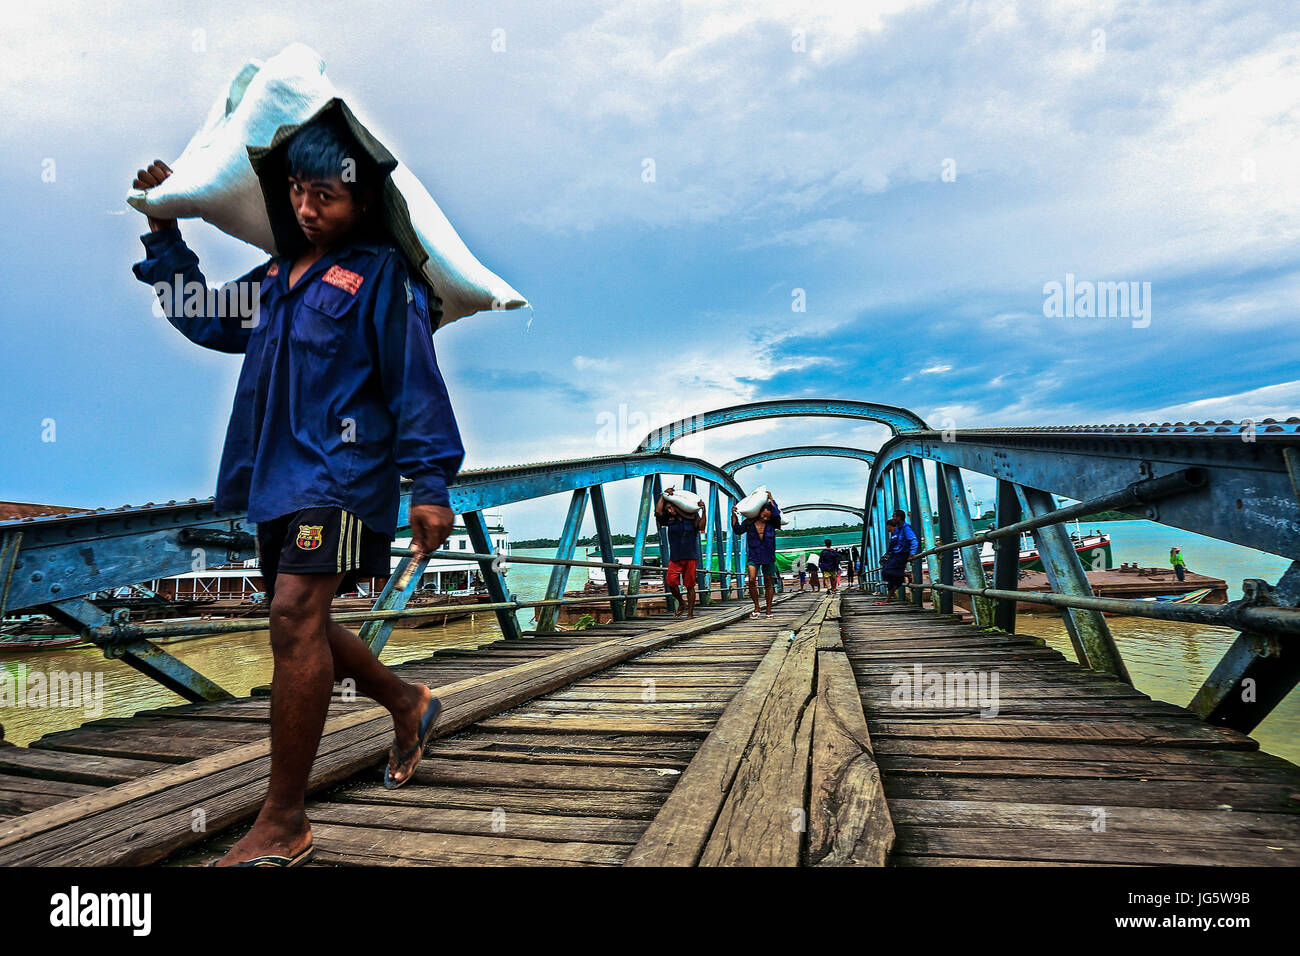 Workers unloading cargo from boats onto awaiting lorries at a dock in Yangon, Myanmar Stock Photo